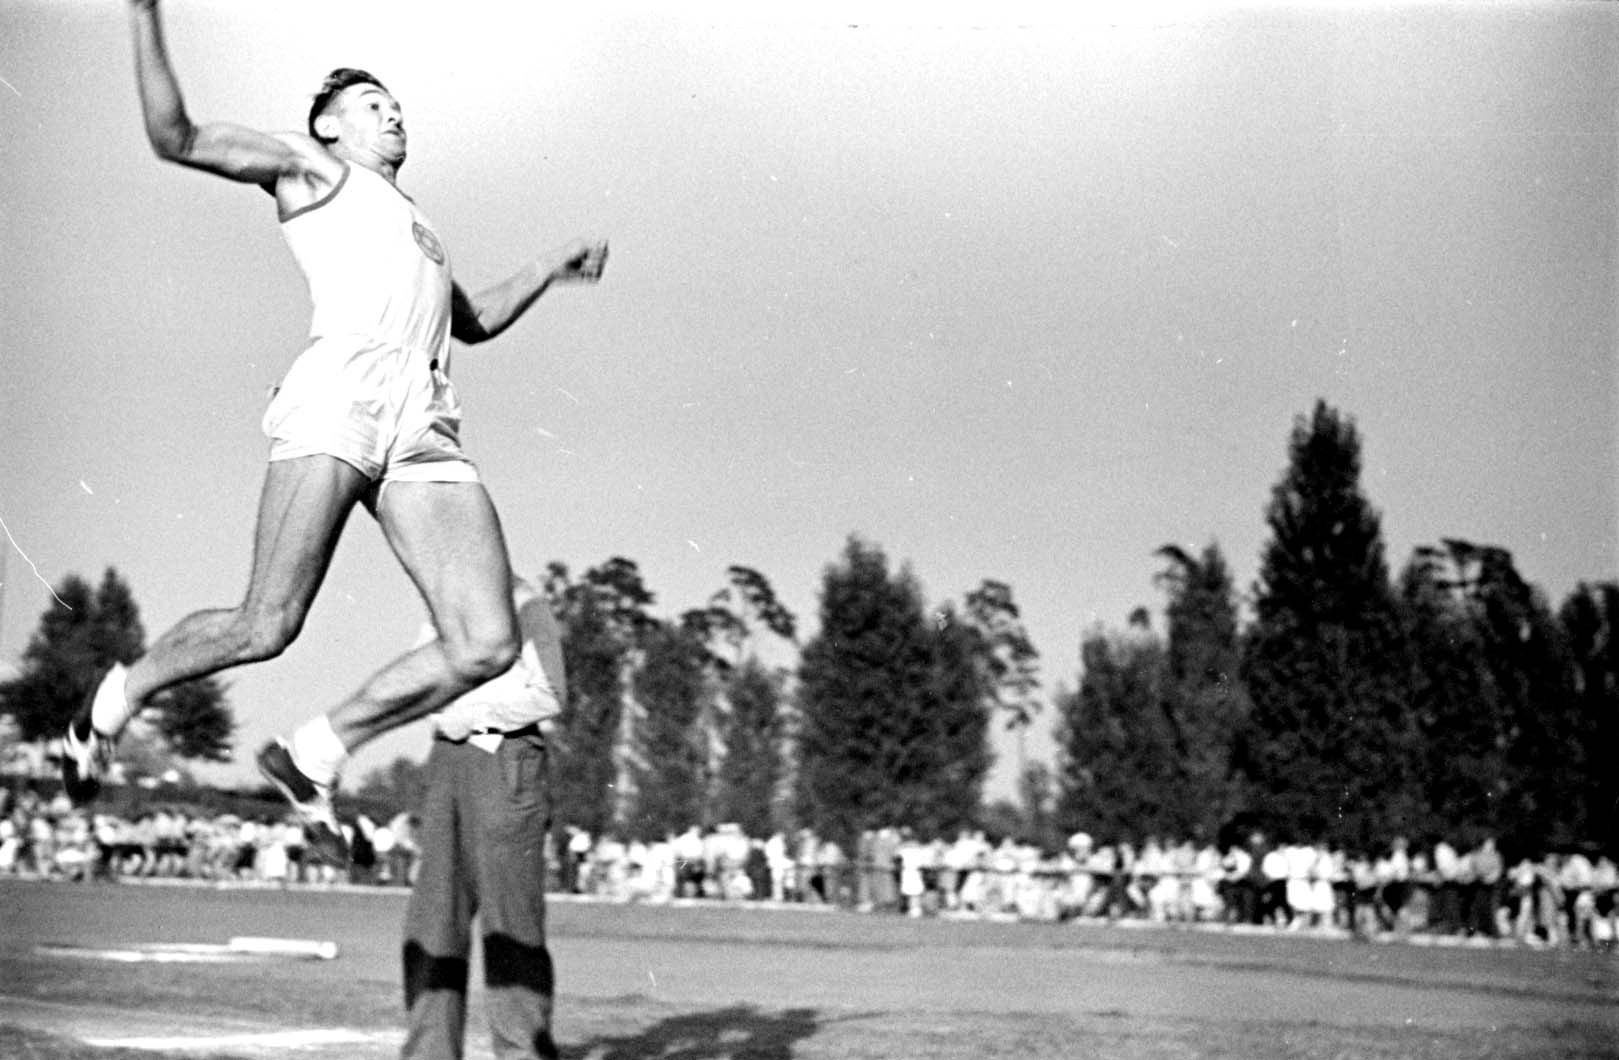 Germany, August 1937, a long jump event at a "Maccabi" track and field competition